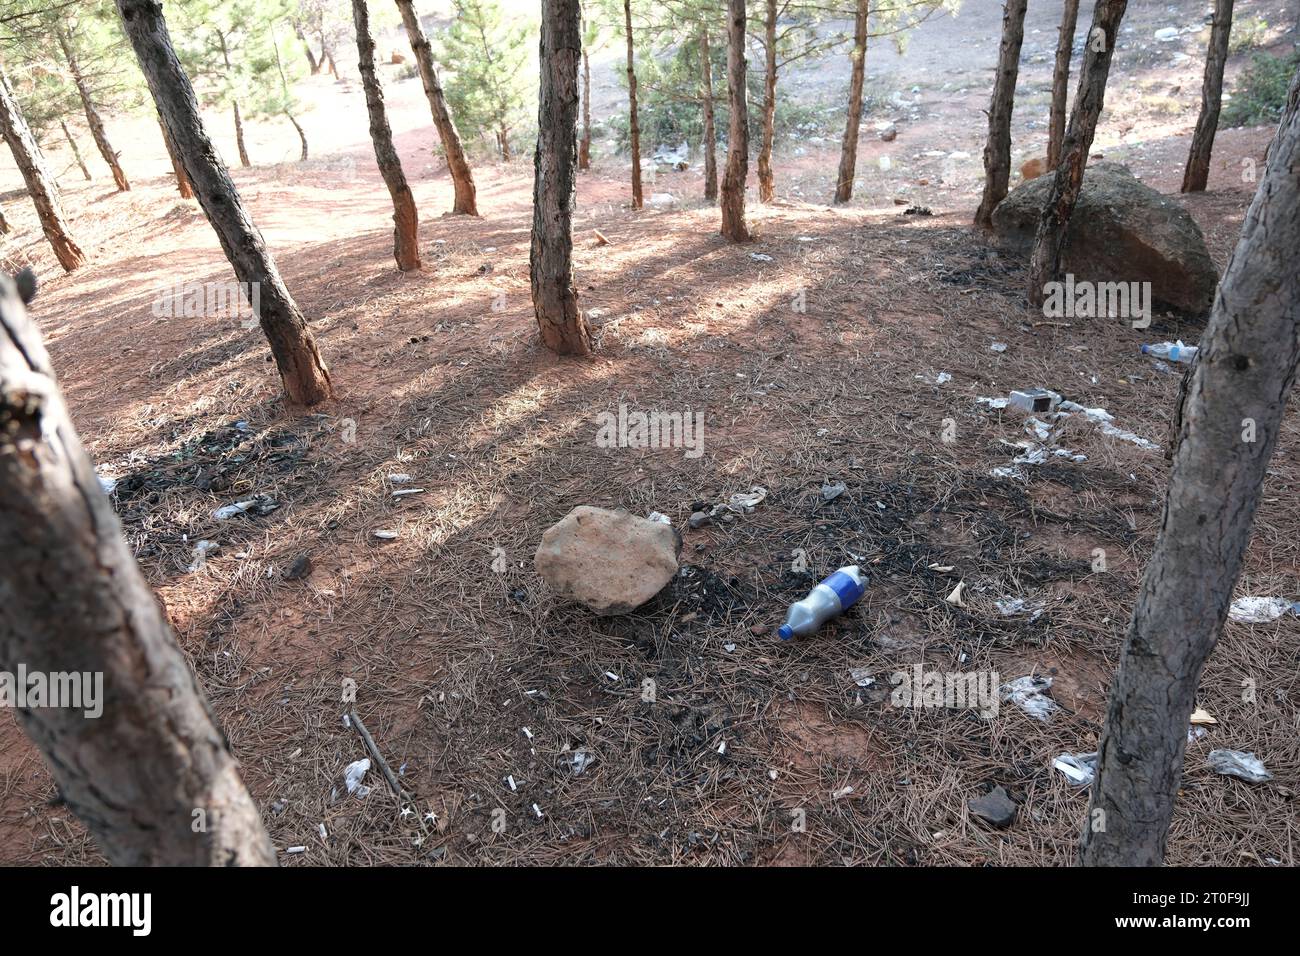 Environmental pollution in forests or groves. Plastic waste among the trees. Stock Photo